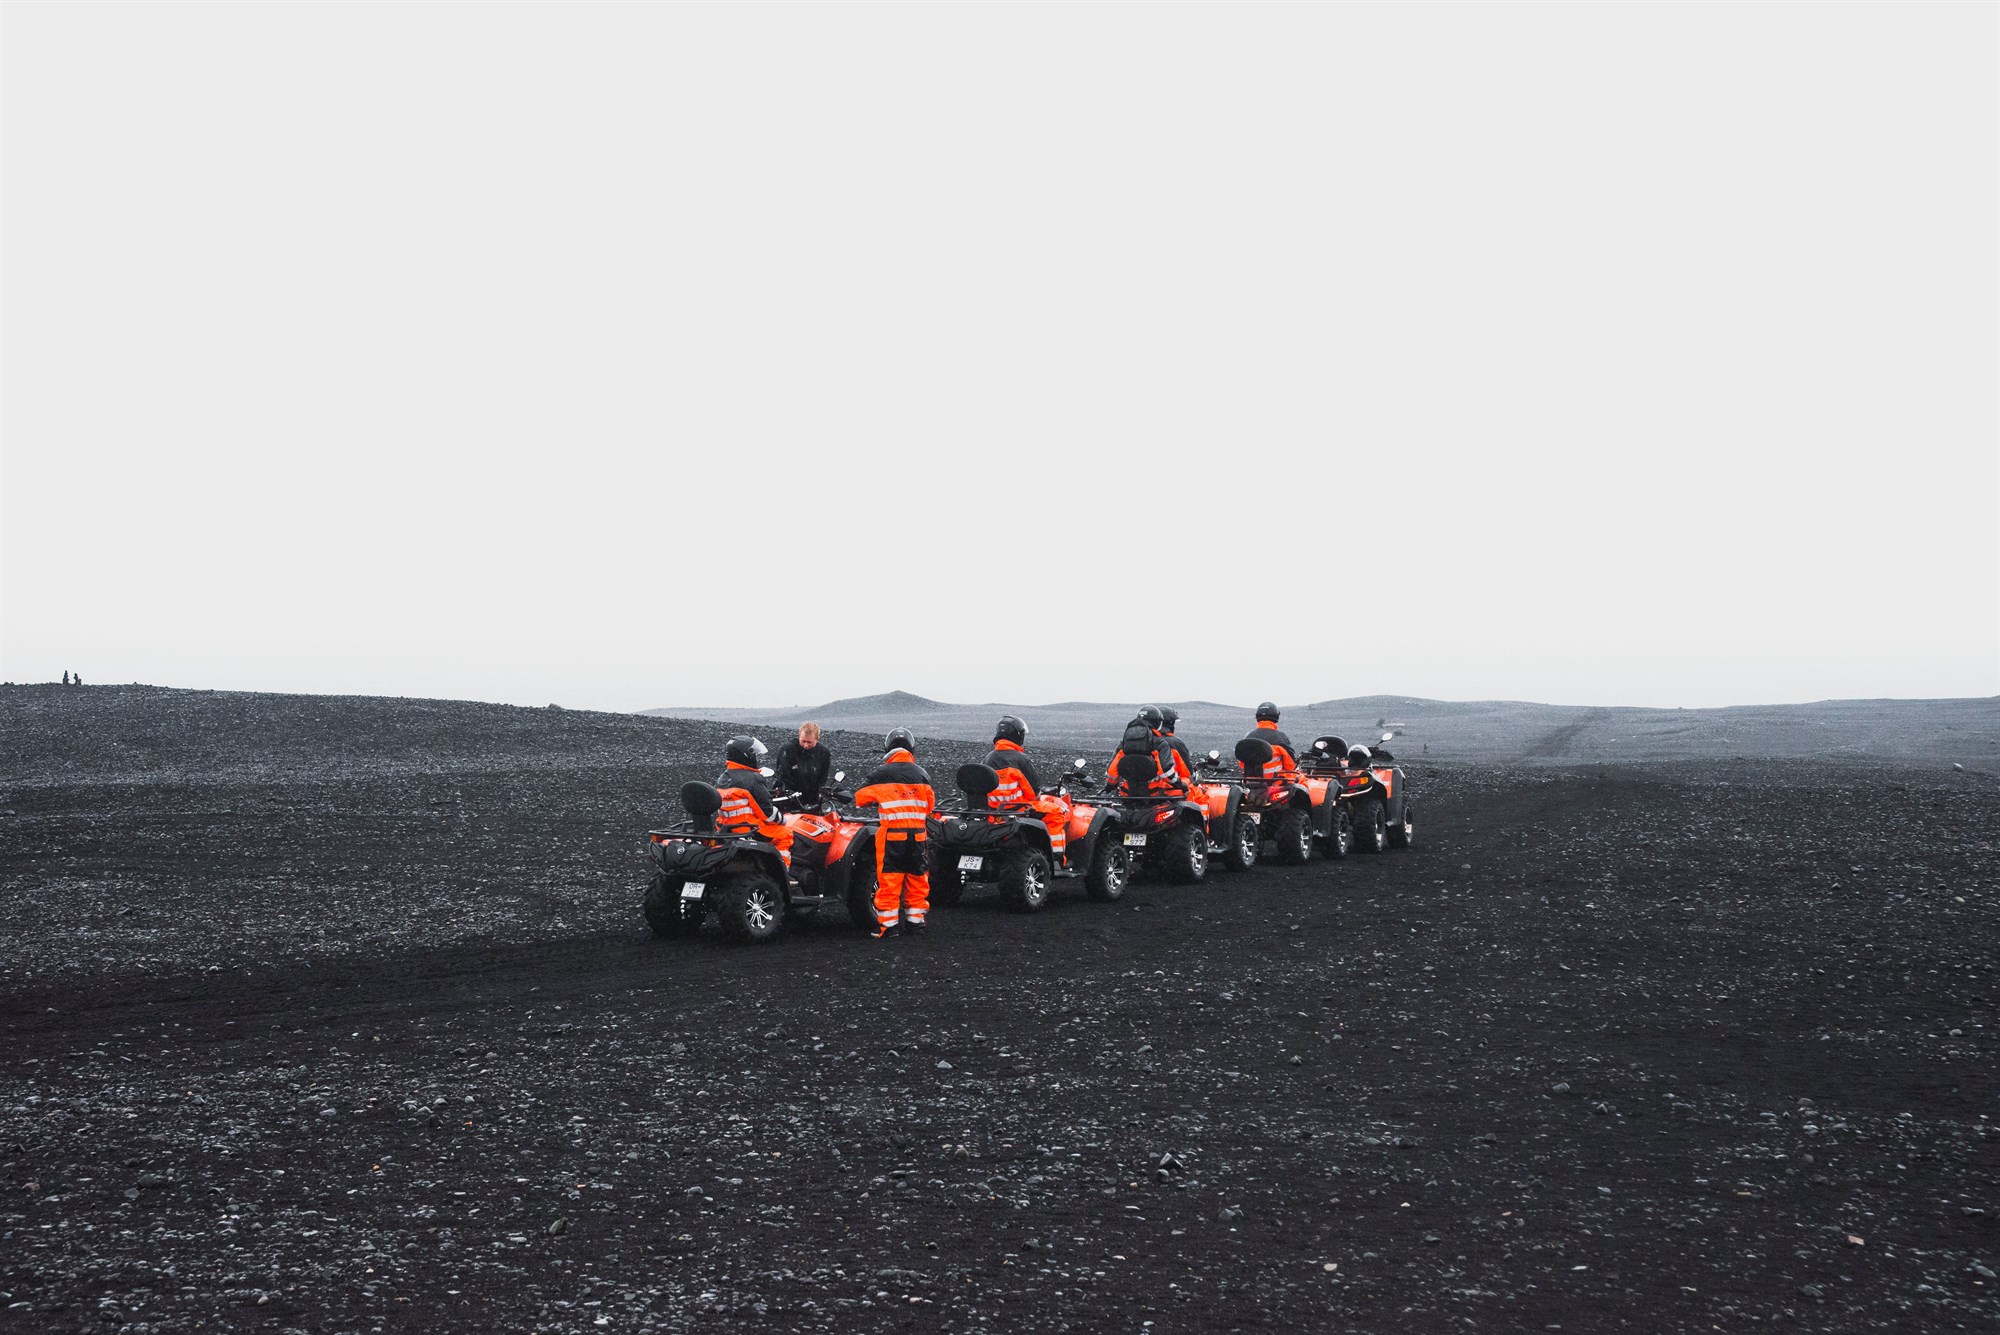 Group of people in bright suits on ATVs in south Iceland.